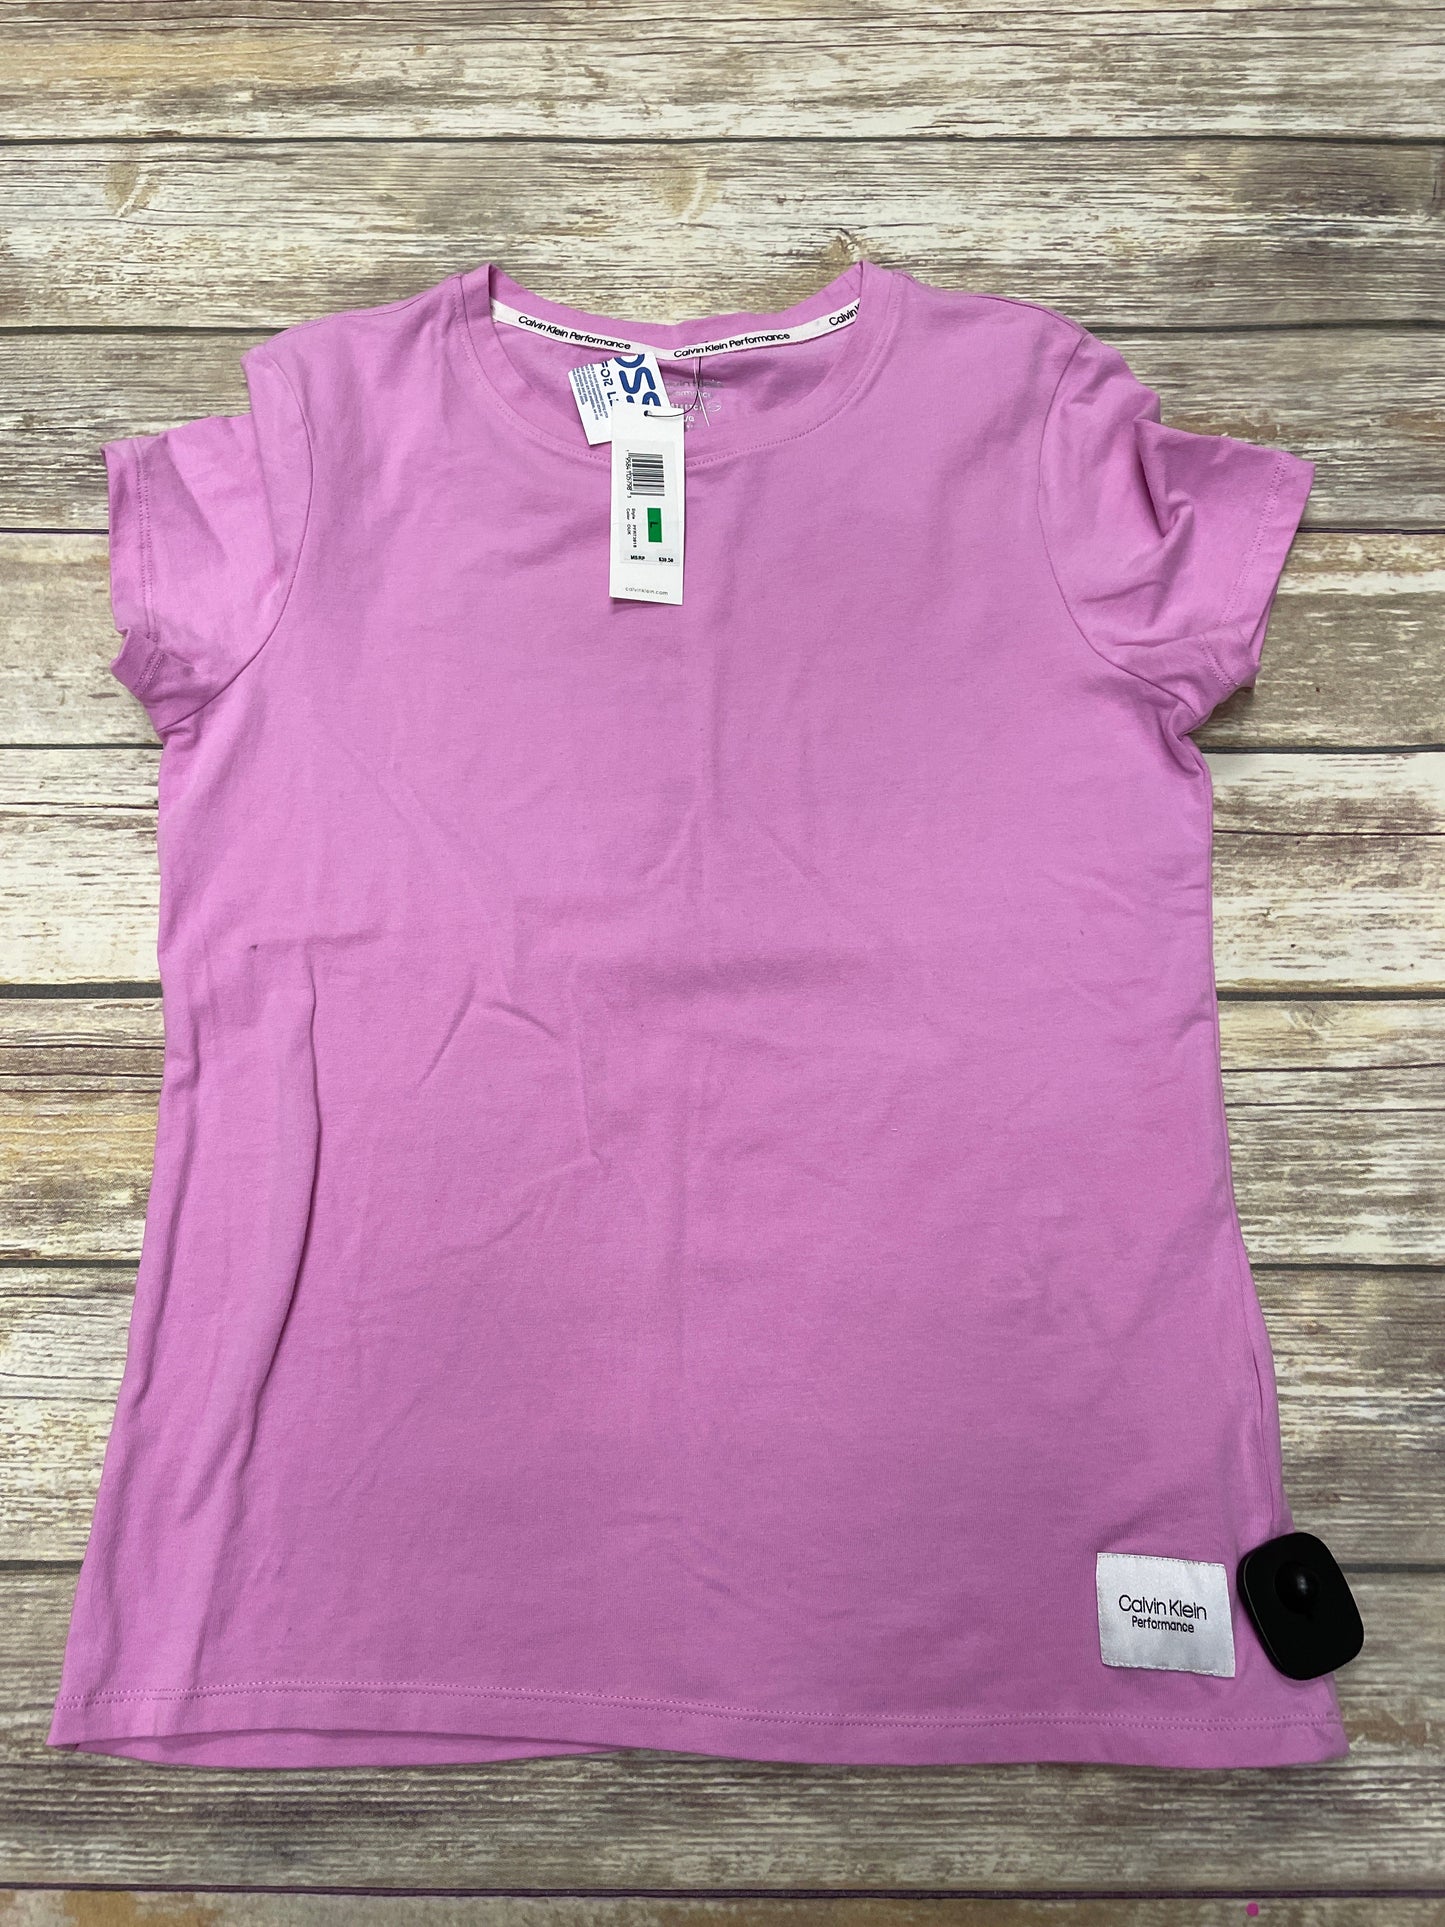 Pink Athletic Top Short Sleeve Calvin Klein Performance, Size L